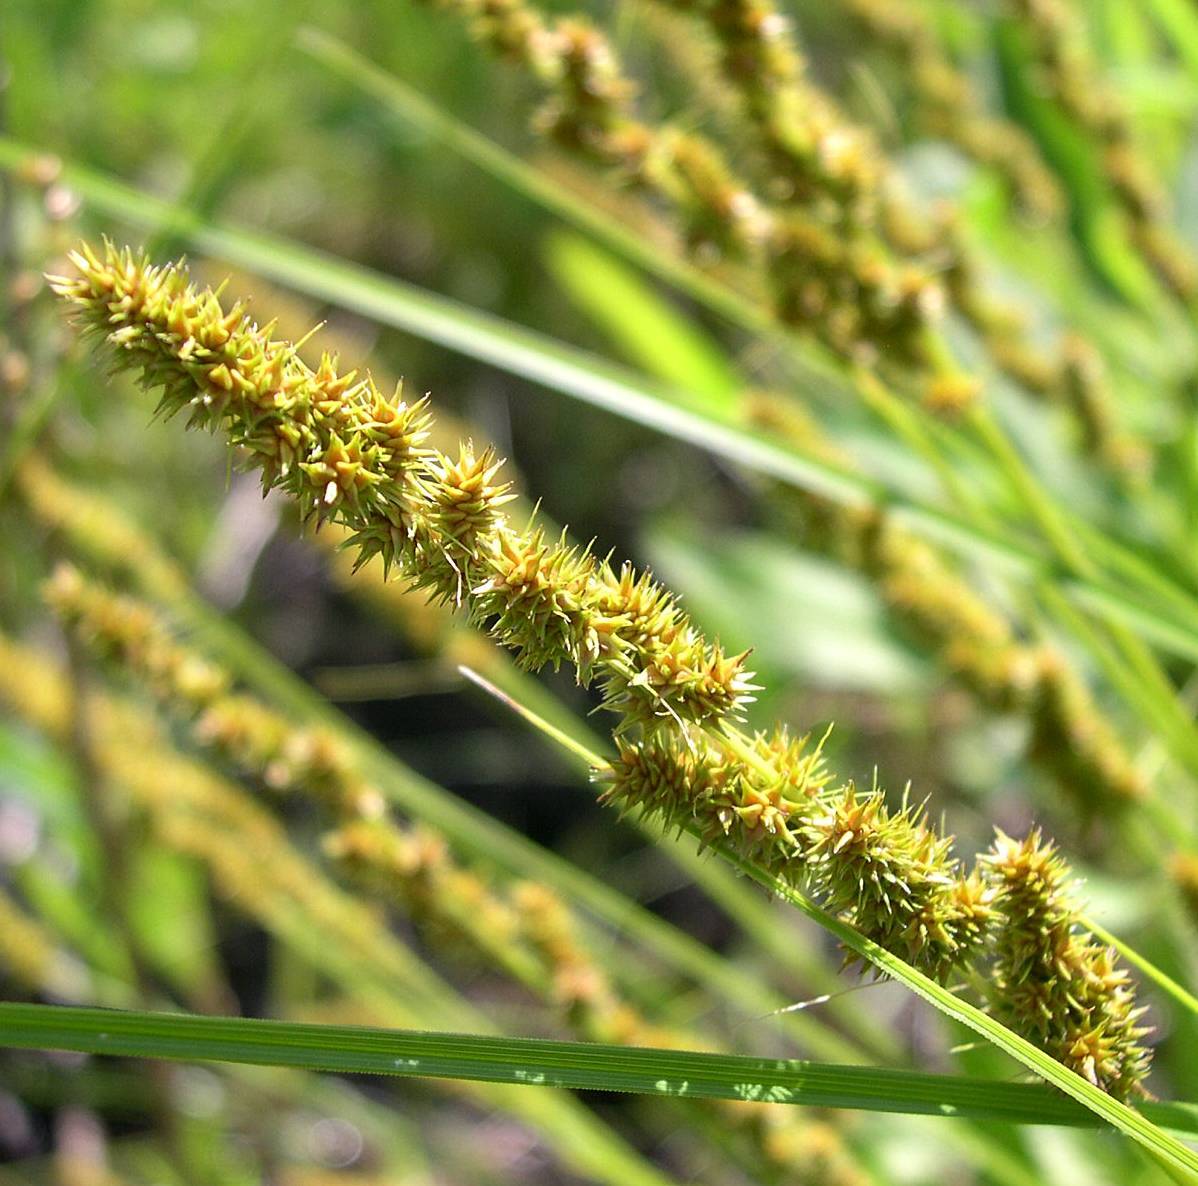 lime-gold spikelets with green foliage